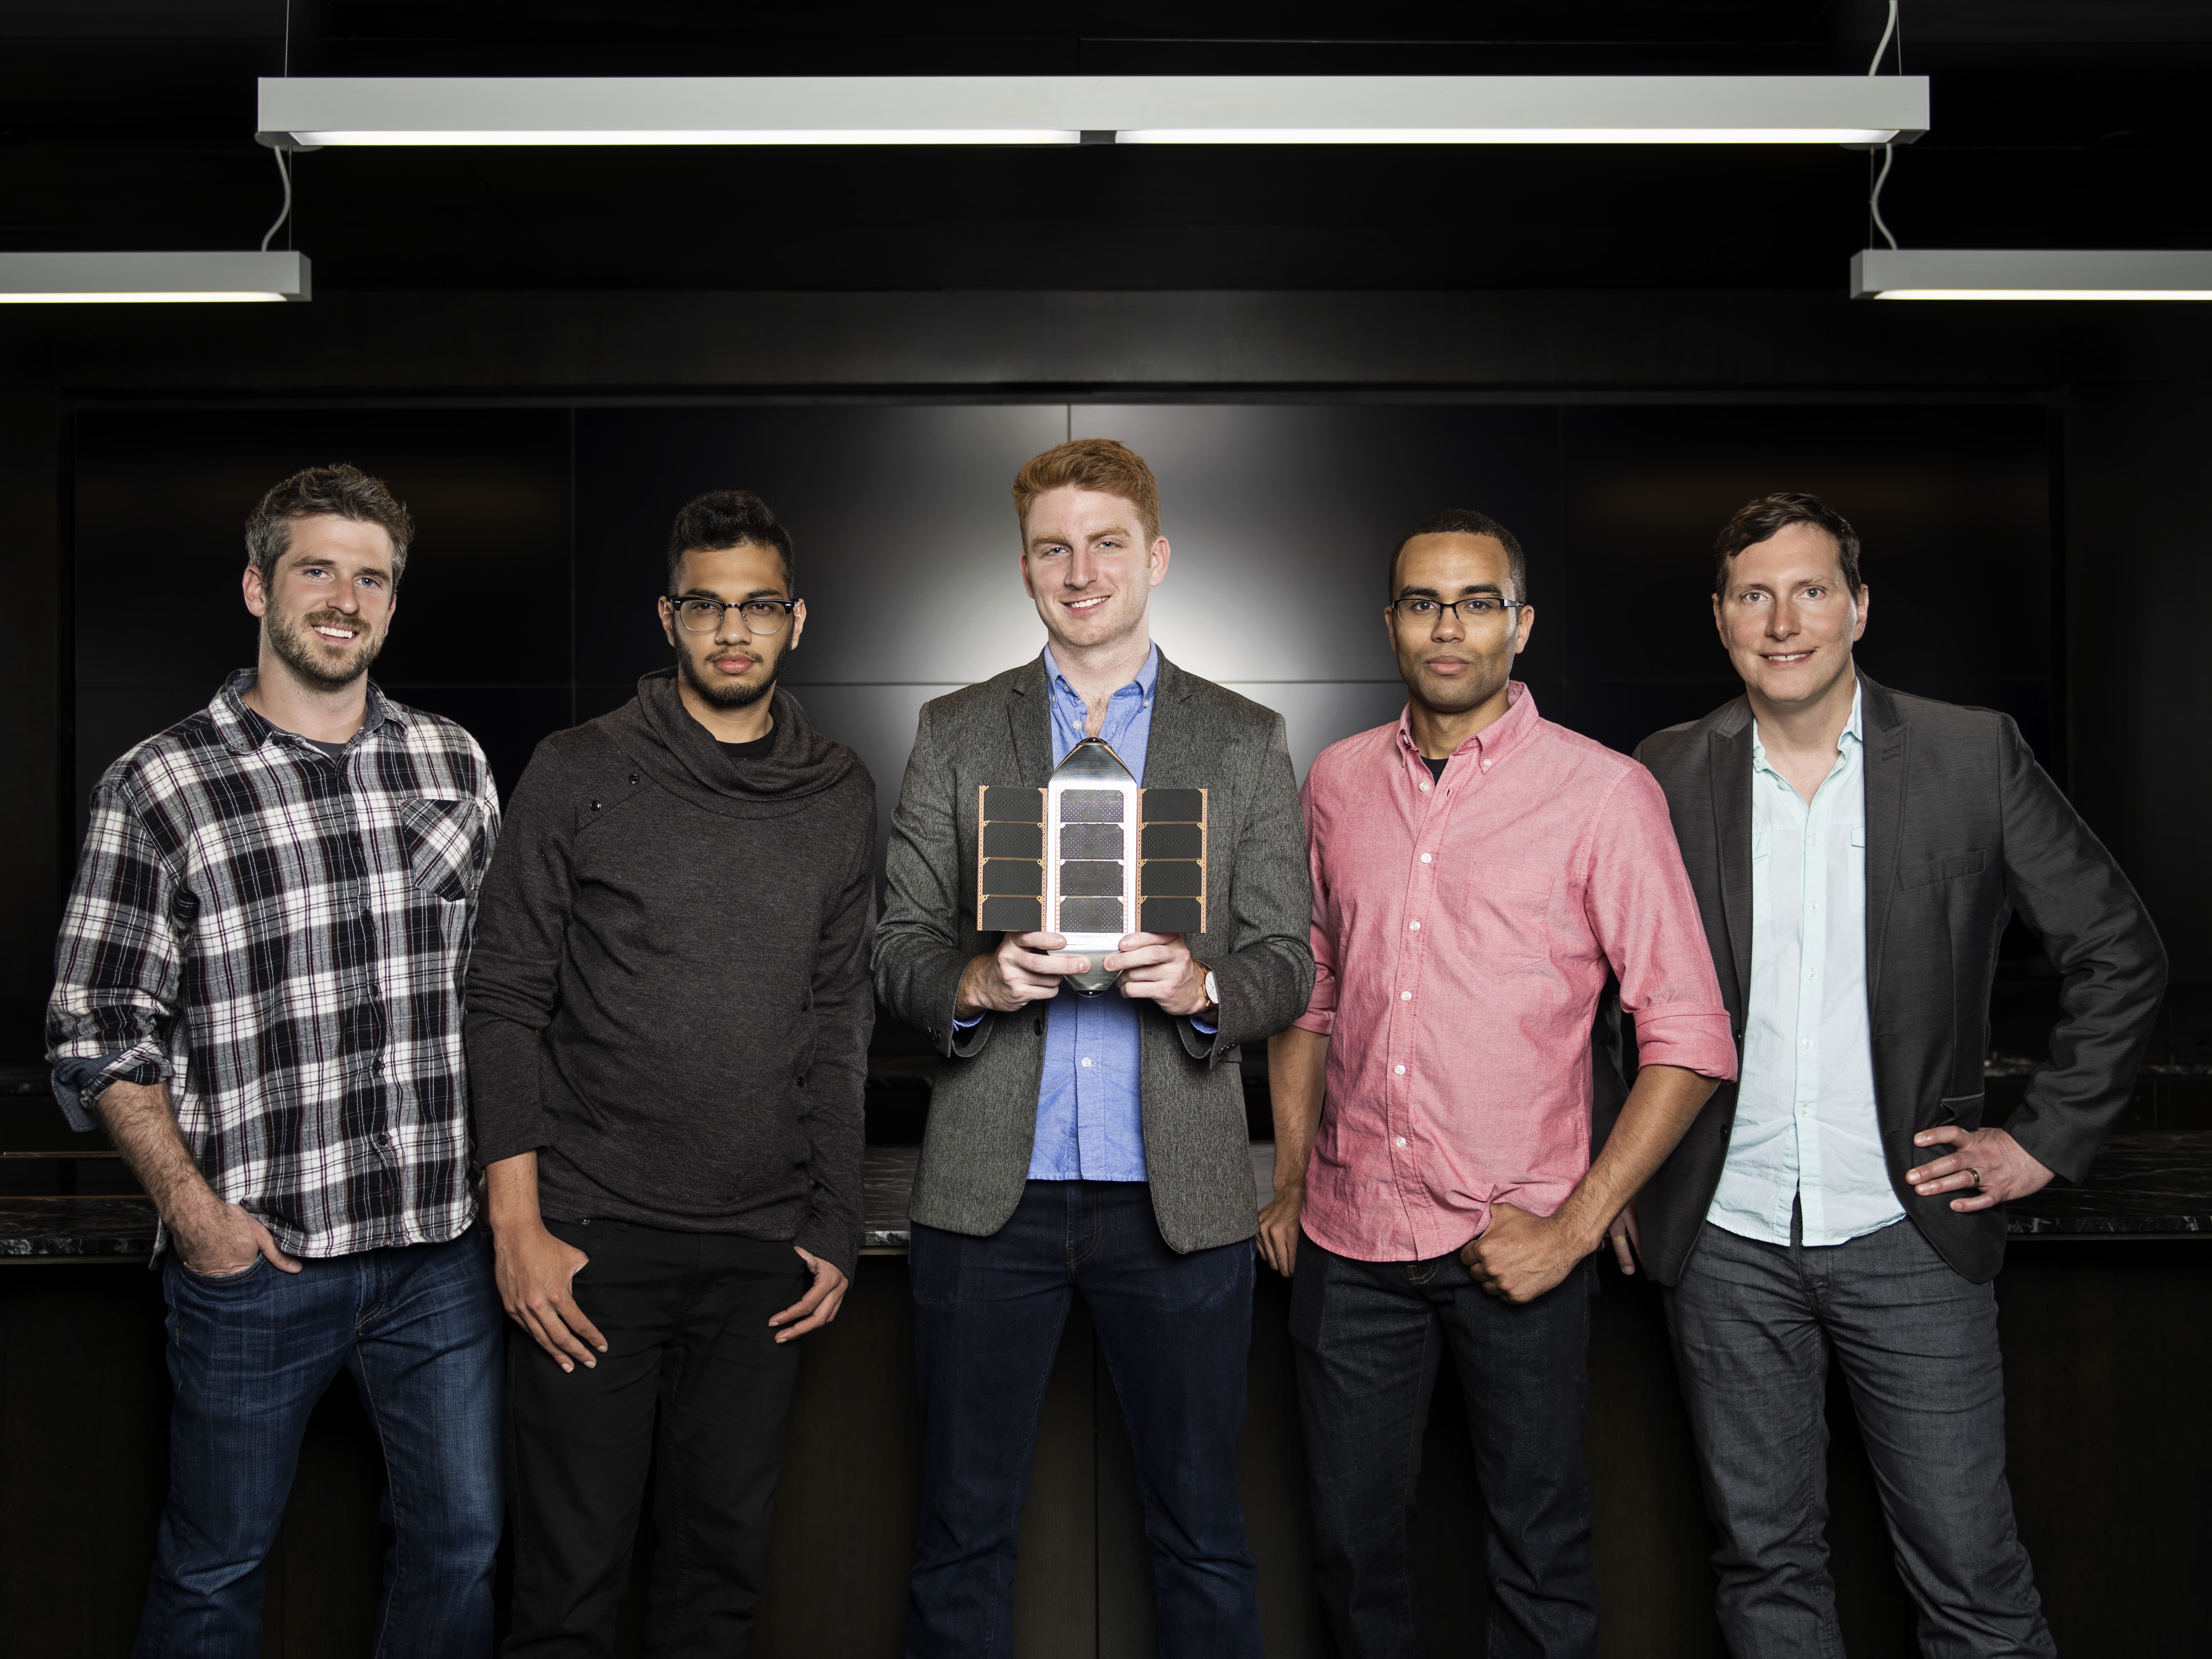 Here the entire SpaceVR team displays their satellite prototype. From the left, Brad Farquar (Head of Sales) , Varun Vruddhula (Head of Strategy), Ryan Holmes (Founder & CEO), Blaze Sanders (CTO), Tim